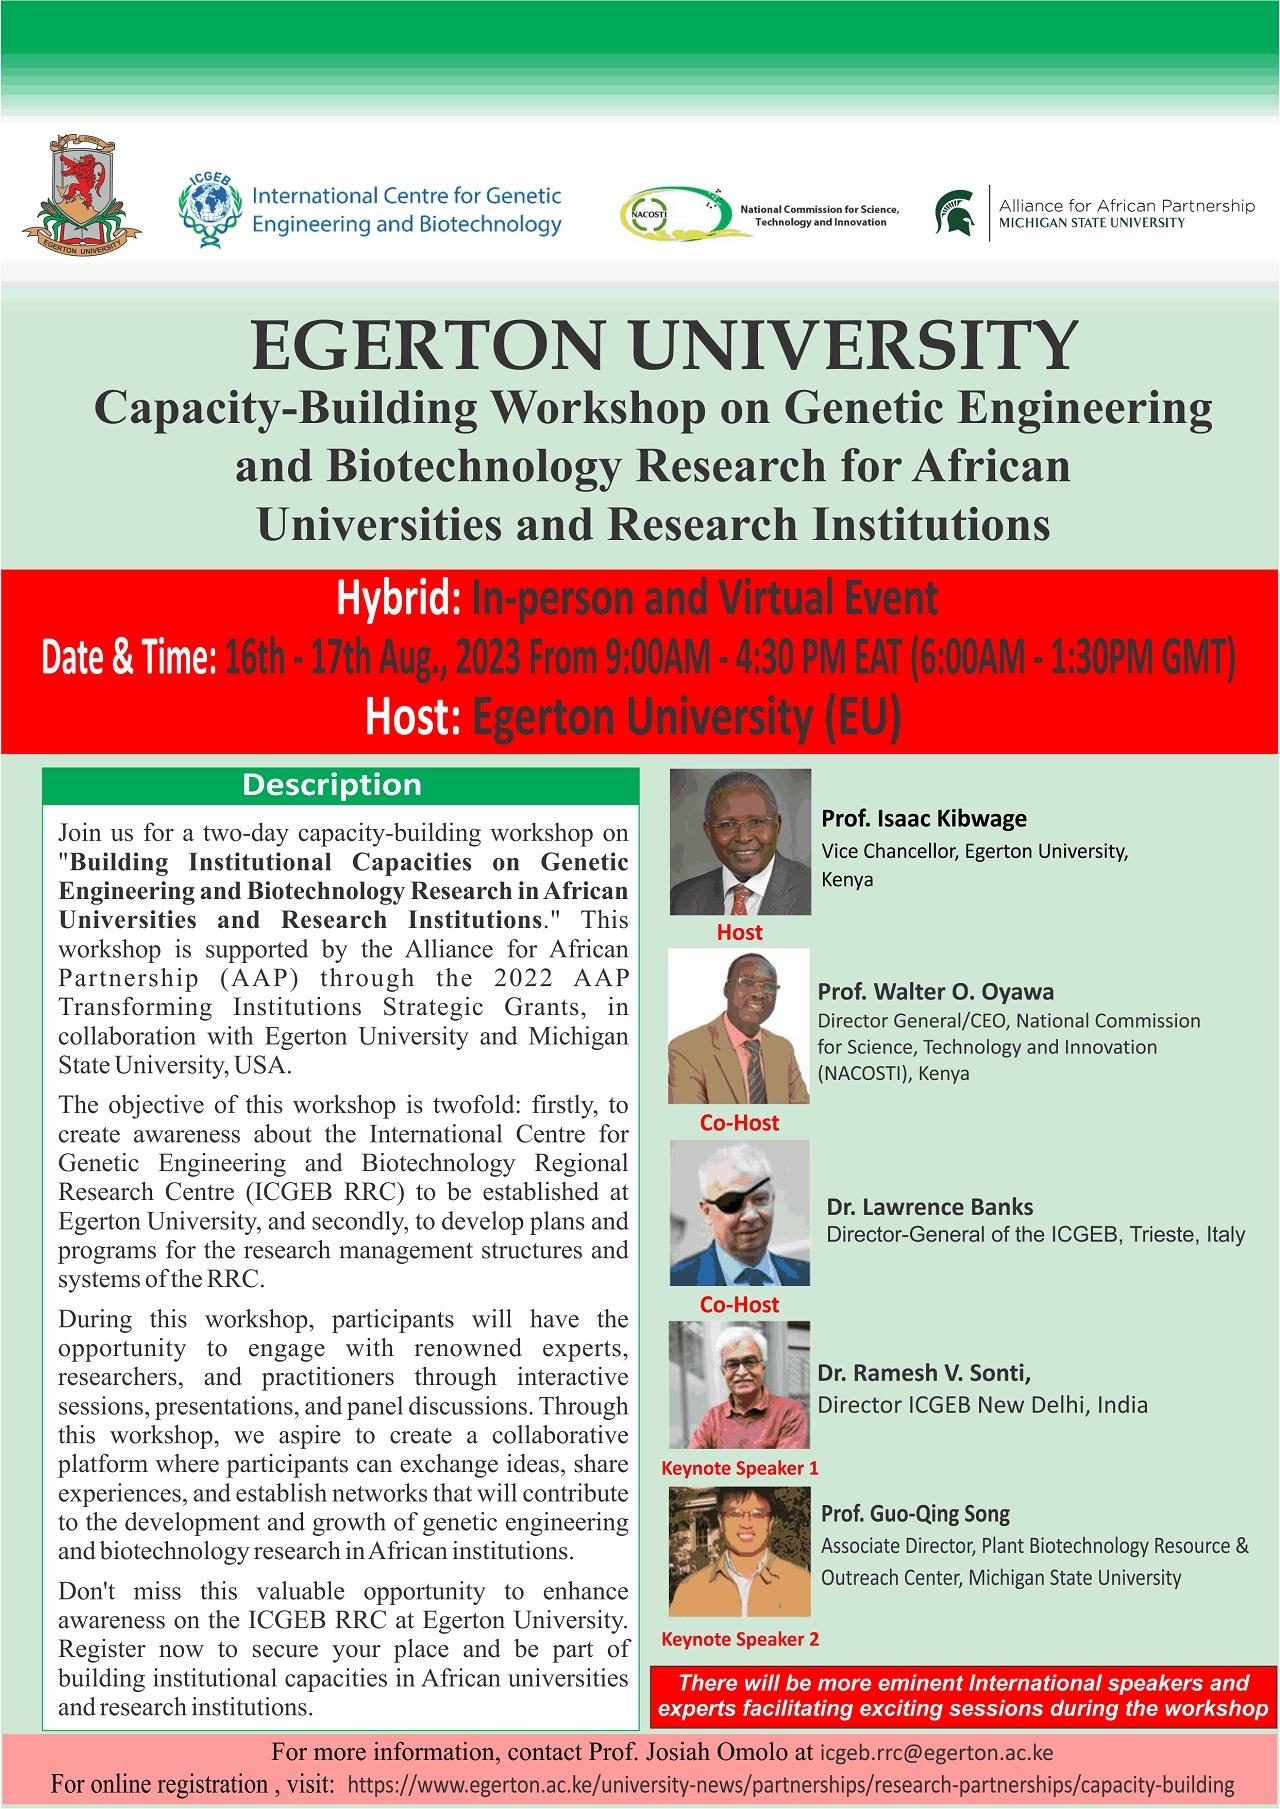 Capacity-Building Workshop on Genetic Engineering and Biotechnology Research for African Universities and Research Institutions